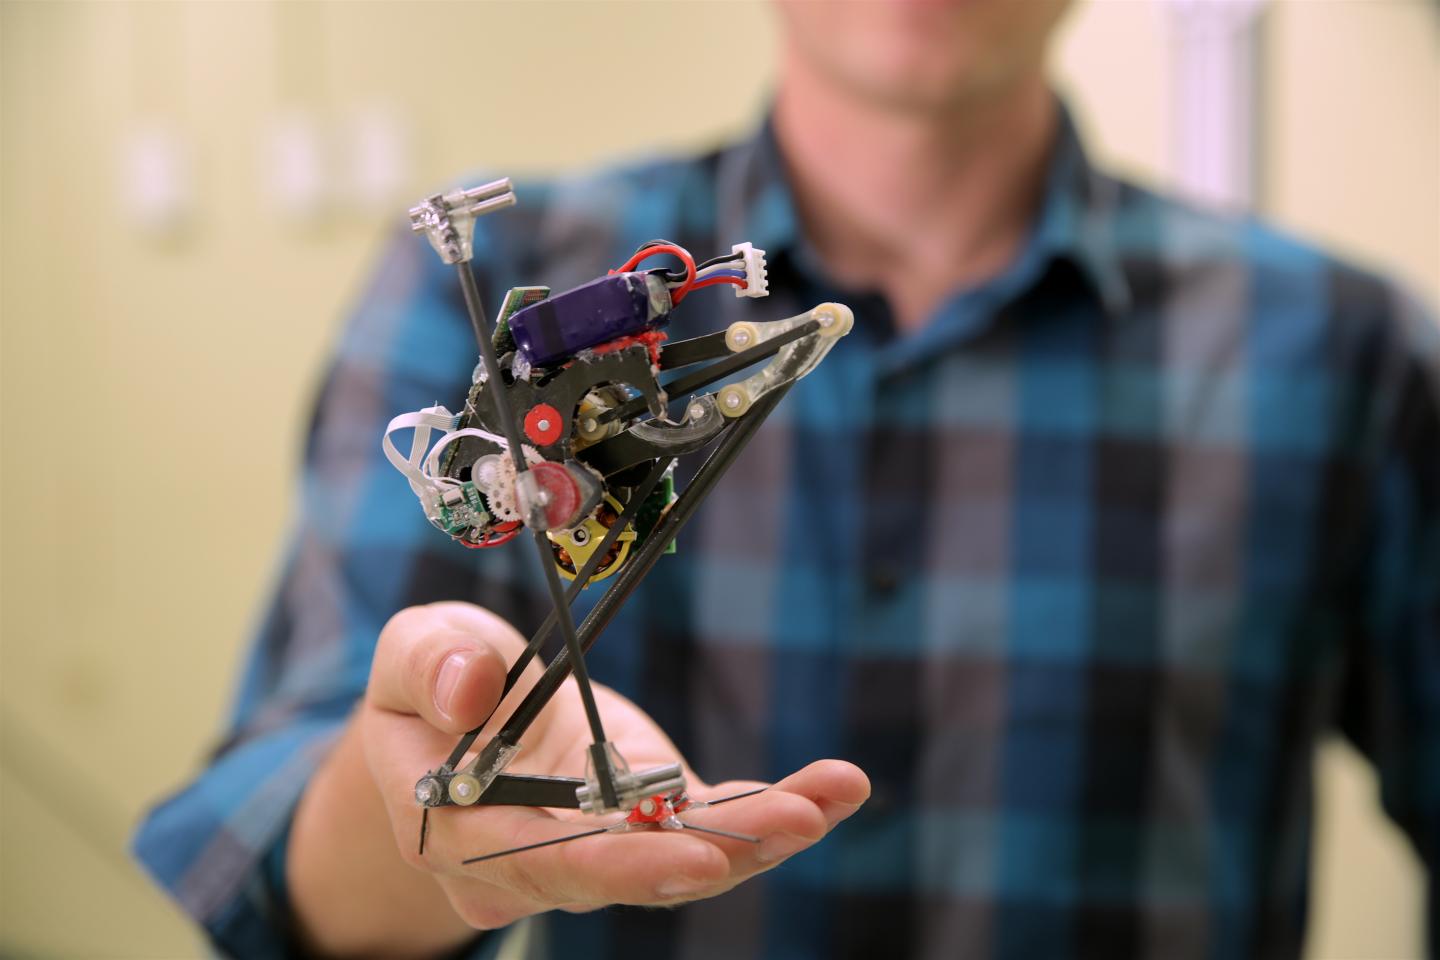 Salto is a small, agile robot developed for rescue operations / Stephen McNally